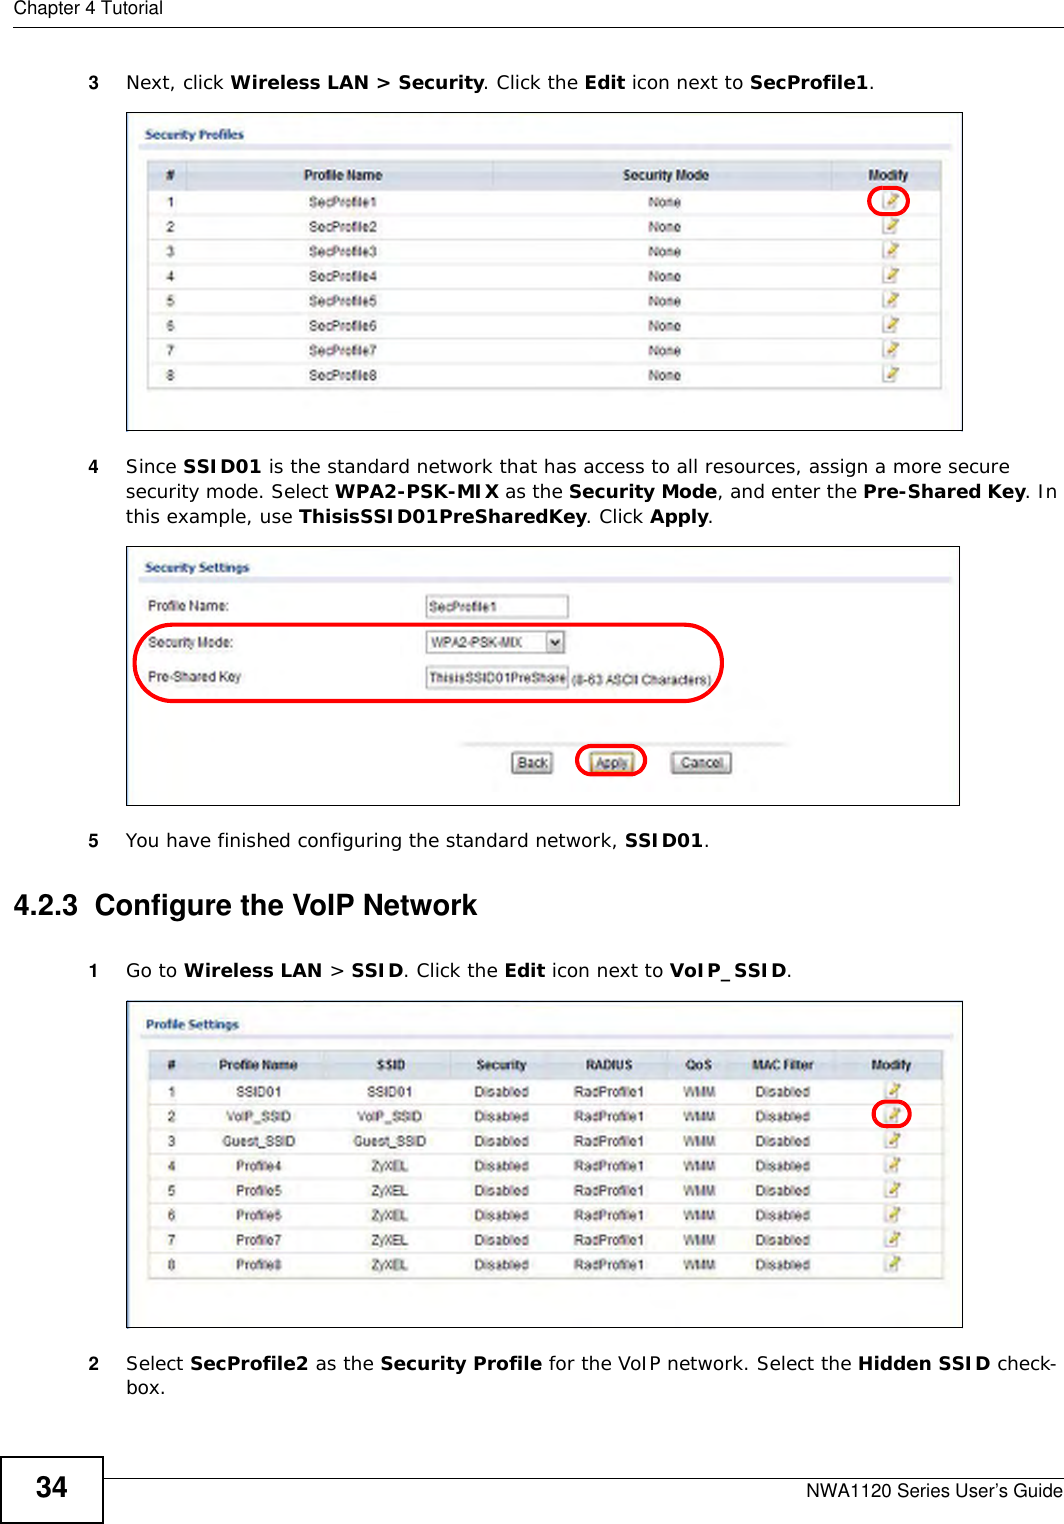 Chapter 4 TutorialNWA1120 Series User’s Guide343Next, click Wireless LAN &gt; Security. Click the Edit icon next to SecProfile1. 4Since SSID01 is the standard network that has access to all resources, assign a more secure security mode. Select WPA2-PSK-MIX as the Security Mode, and enter the Pre-Shared Key. In this example, use ThisisSSID01PreSharedKey. Click Apply. 5You have finished configuring the standard network, SSID01. 4.2.3  Configure the VoIP Network1Go to Wireless LAN &gt; SSID. Click the Edit icon next to VoIP_SSID. 2Select SecProfile2 as the Security Profile for the VoIP network. Select the Hidden SSID check-box. 